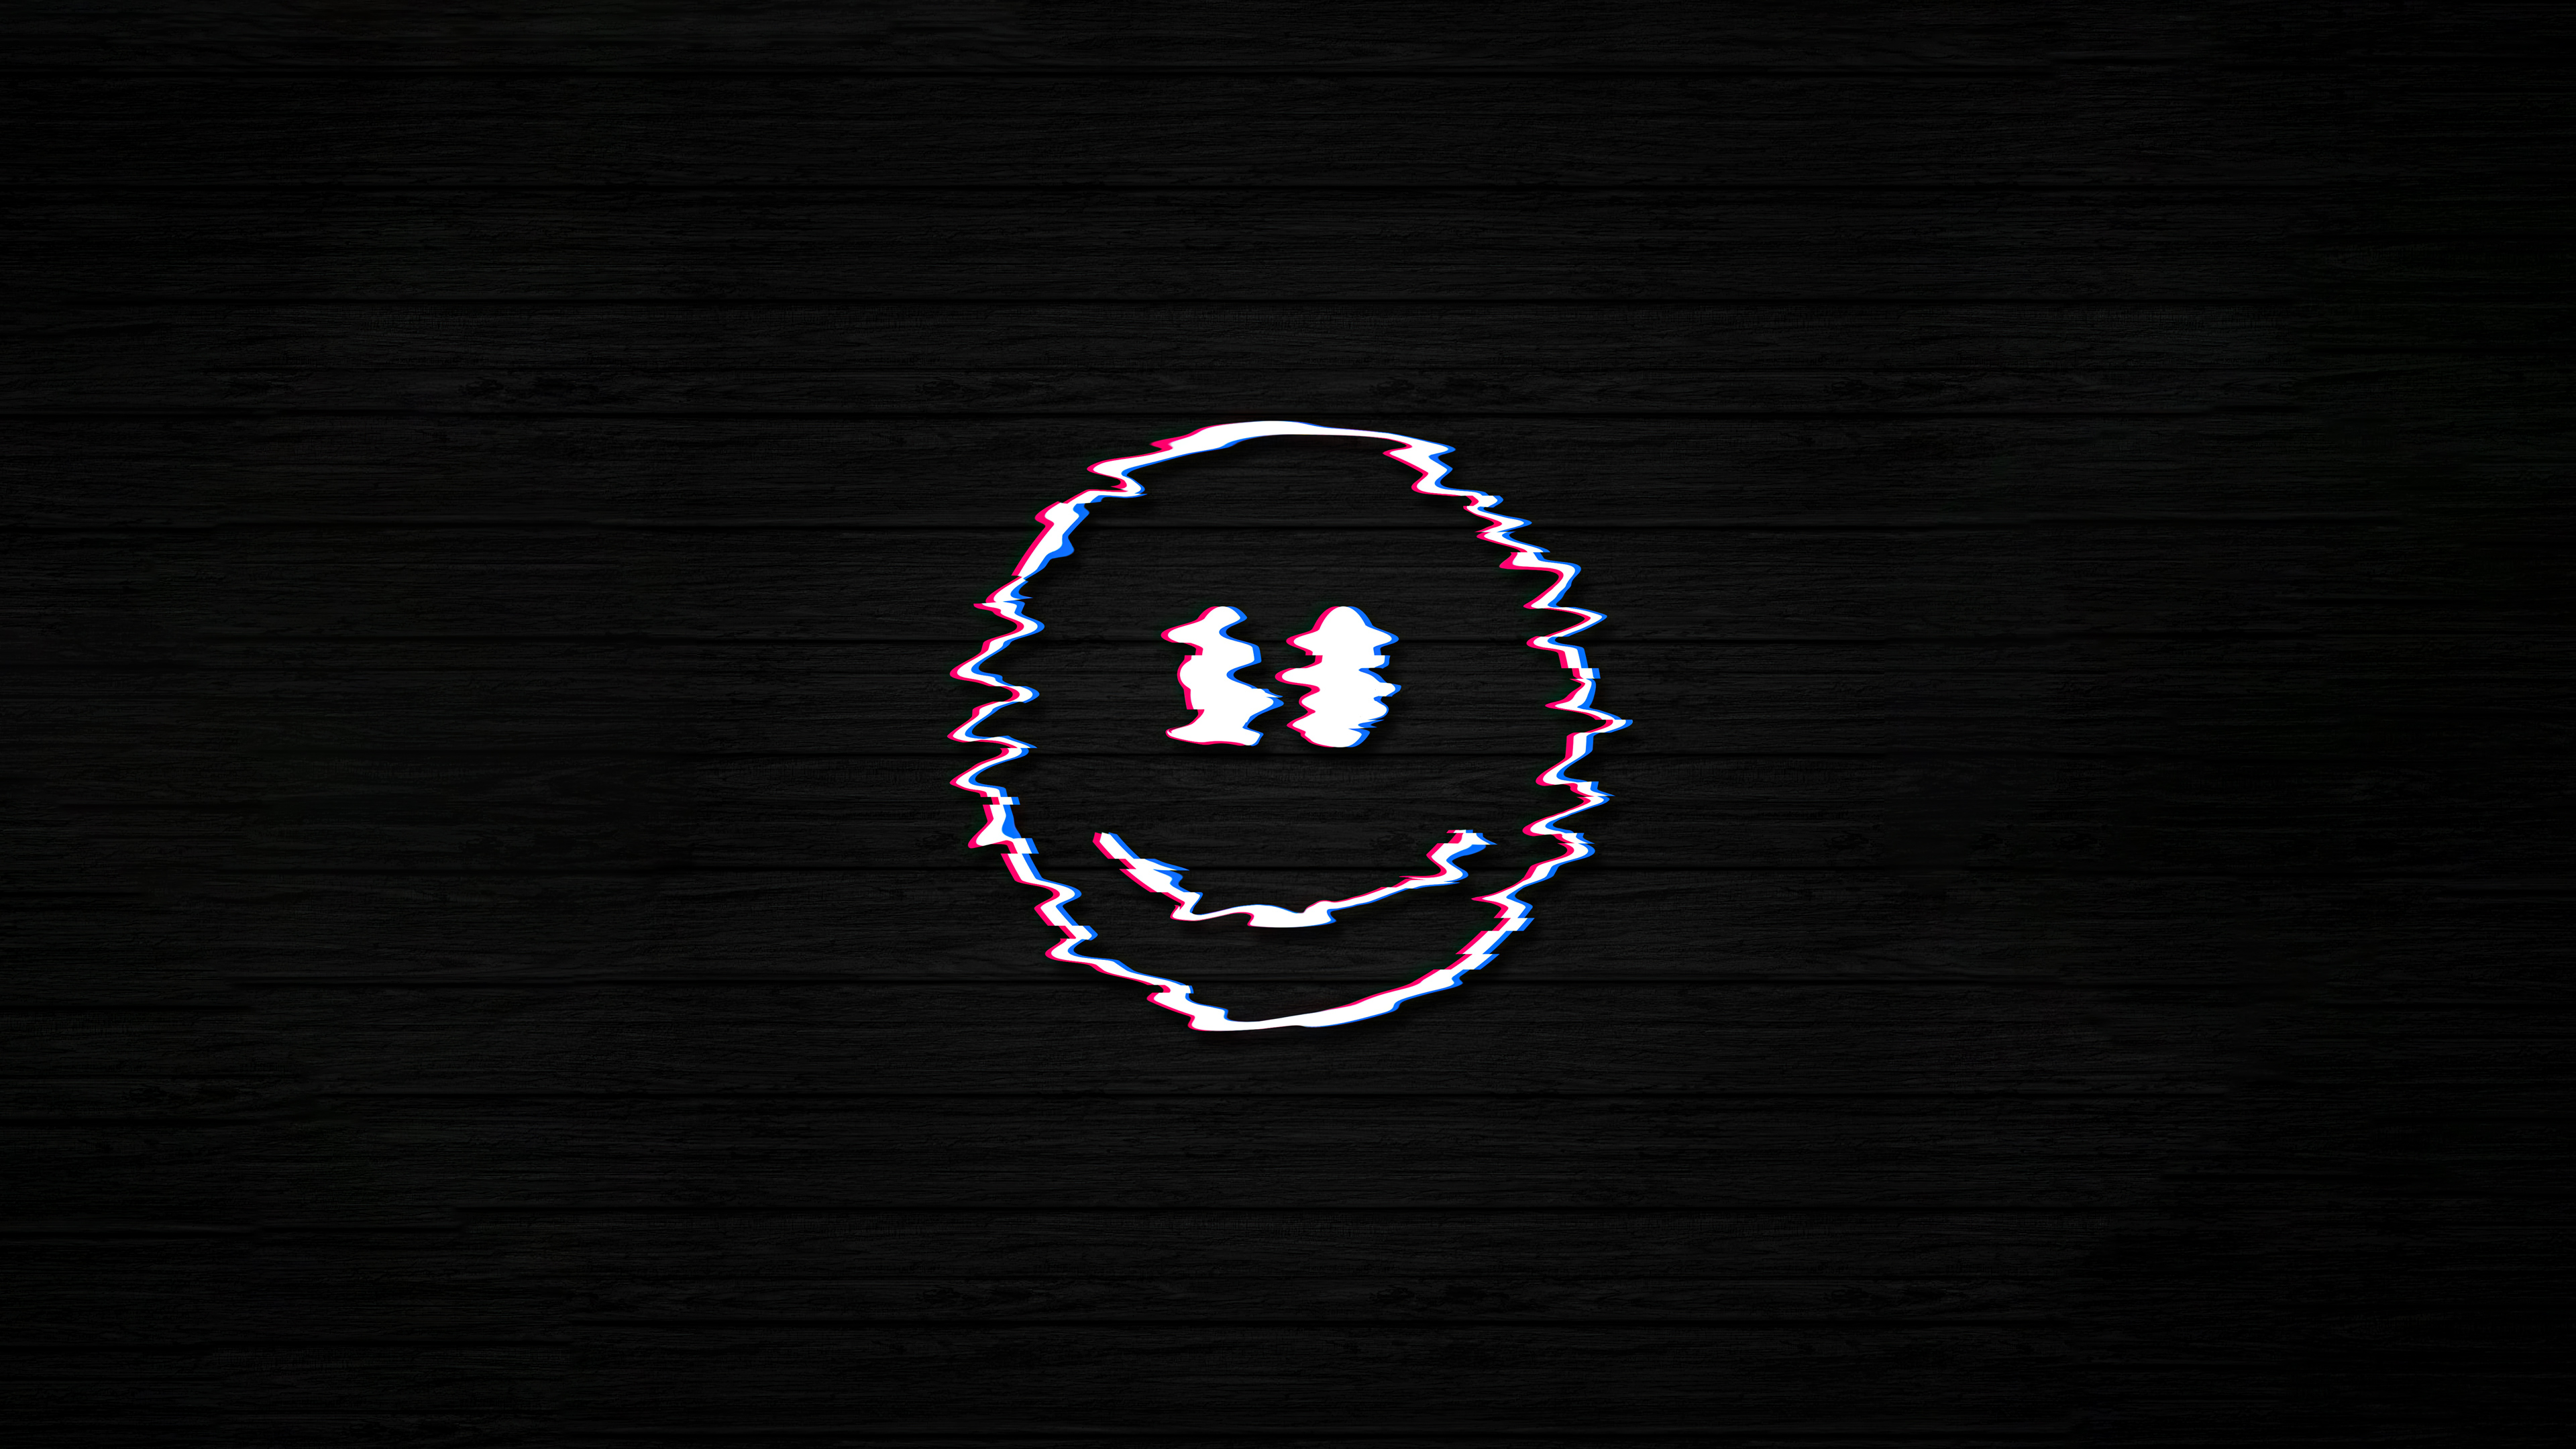 Smiley face with glitch Wallpaper 4k Ultra HD